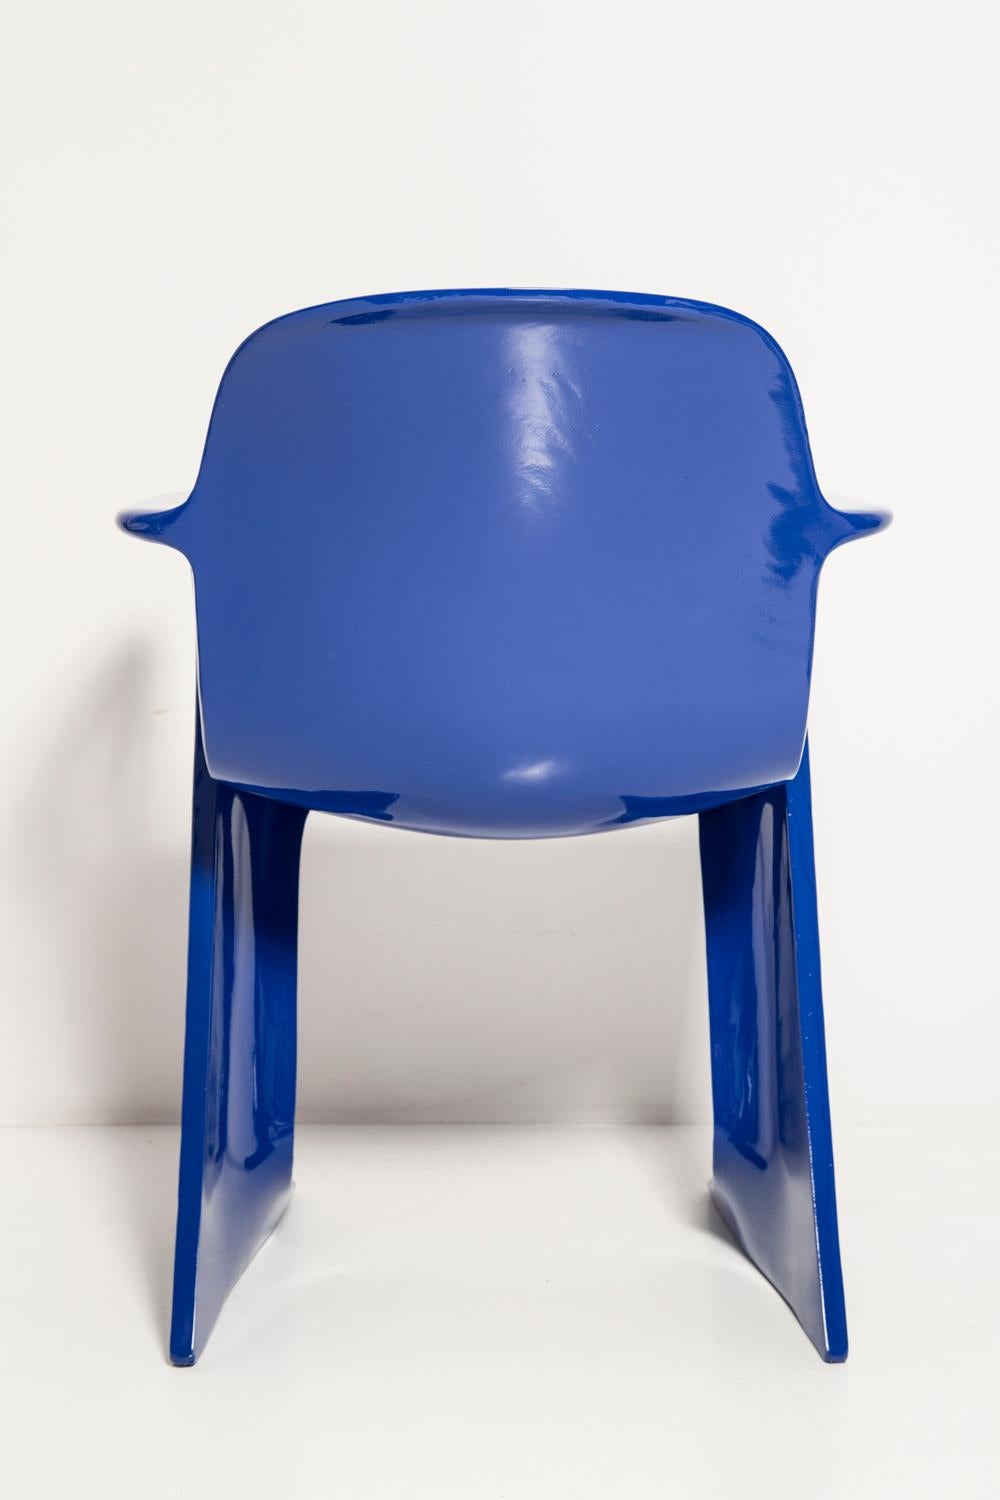 Lacquered Ultramarine Blue Kangaroo Chair Designed by Ernst Moeckl, Germany, 1968 For Sale